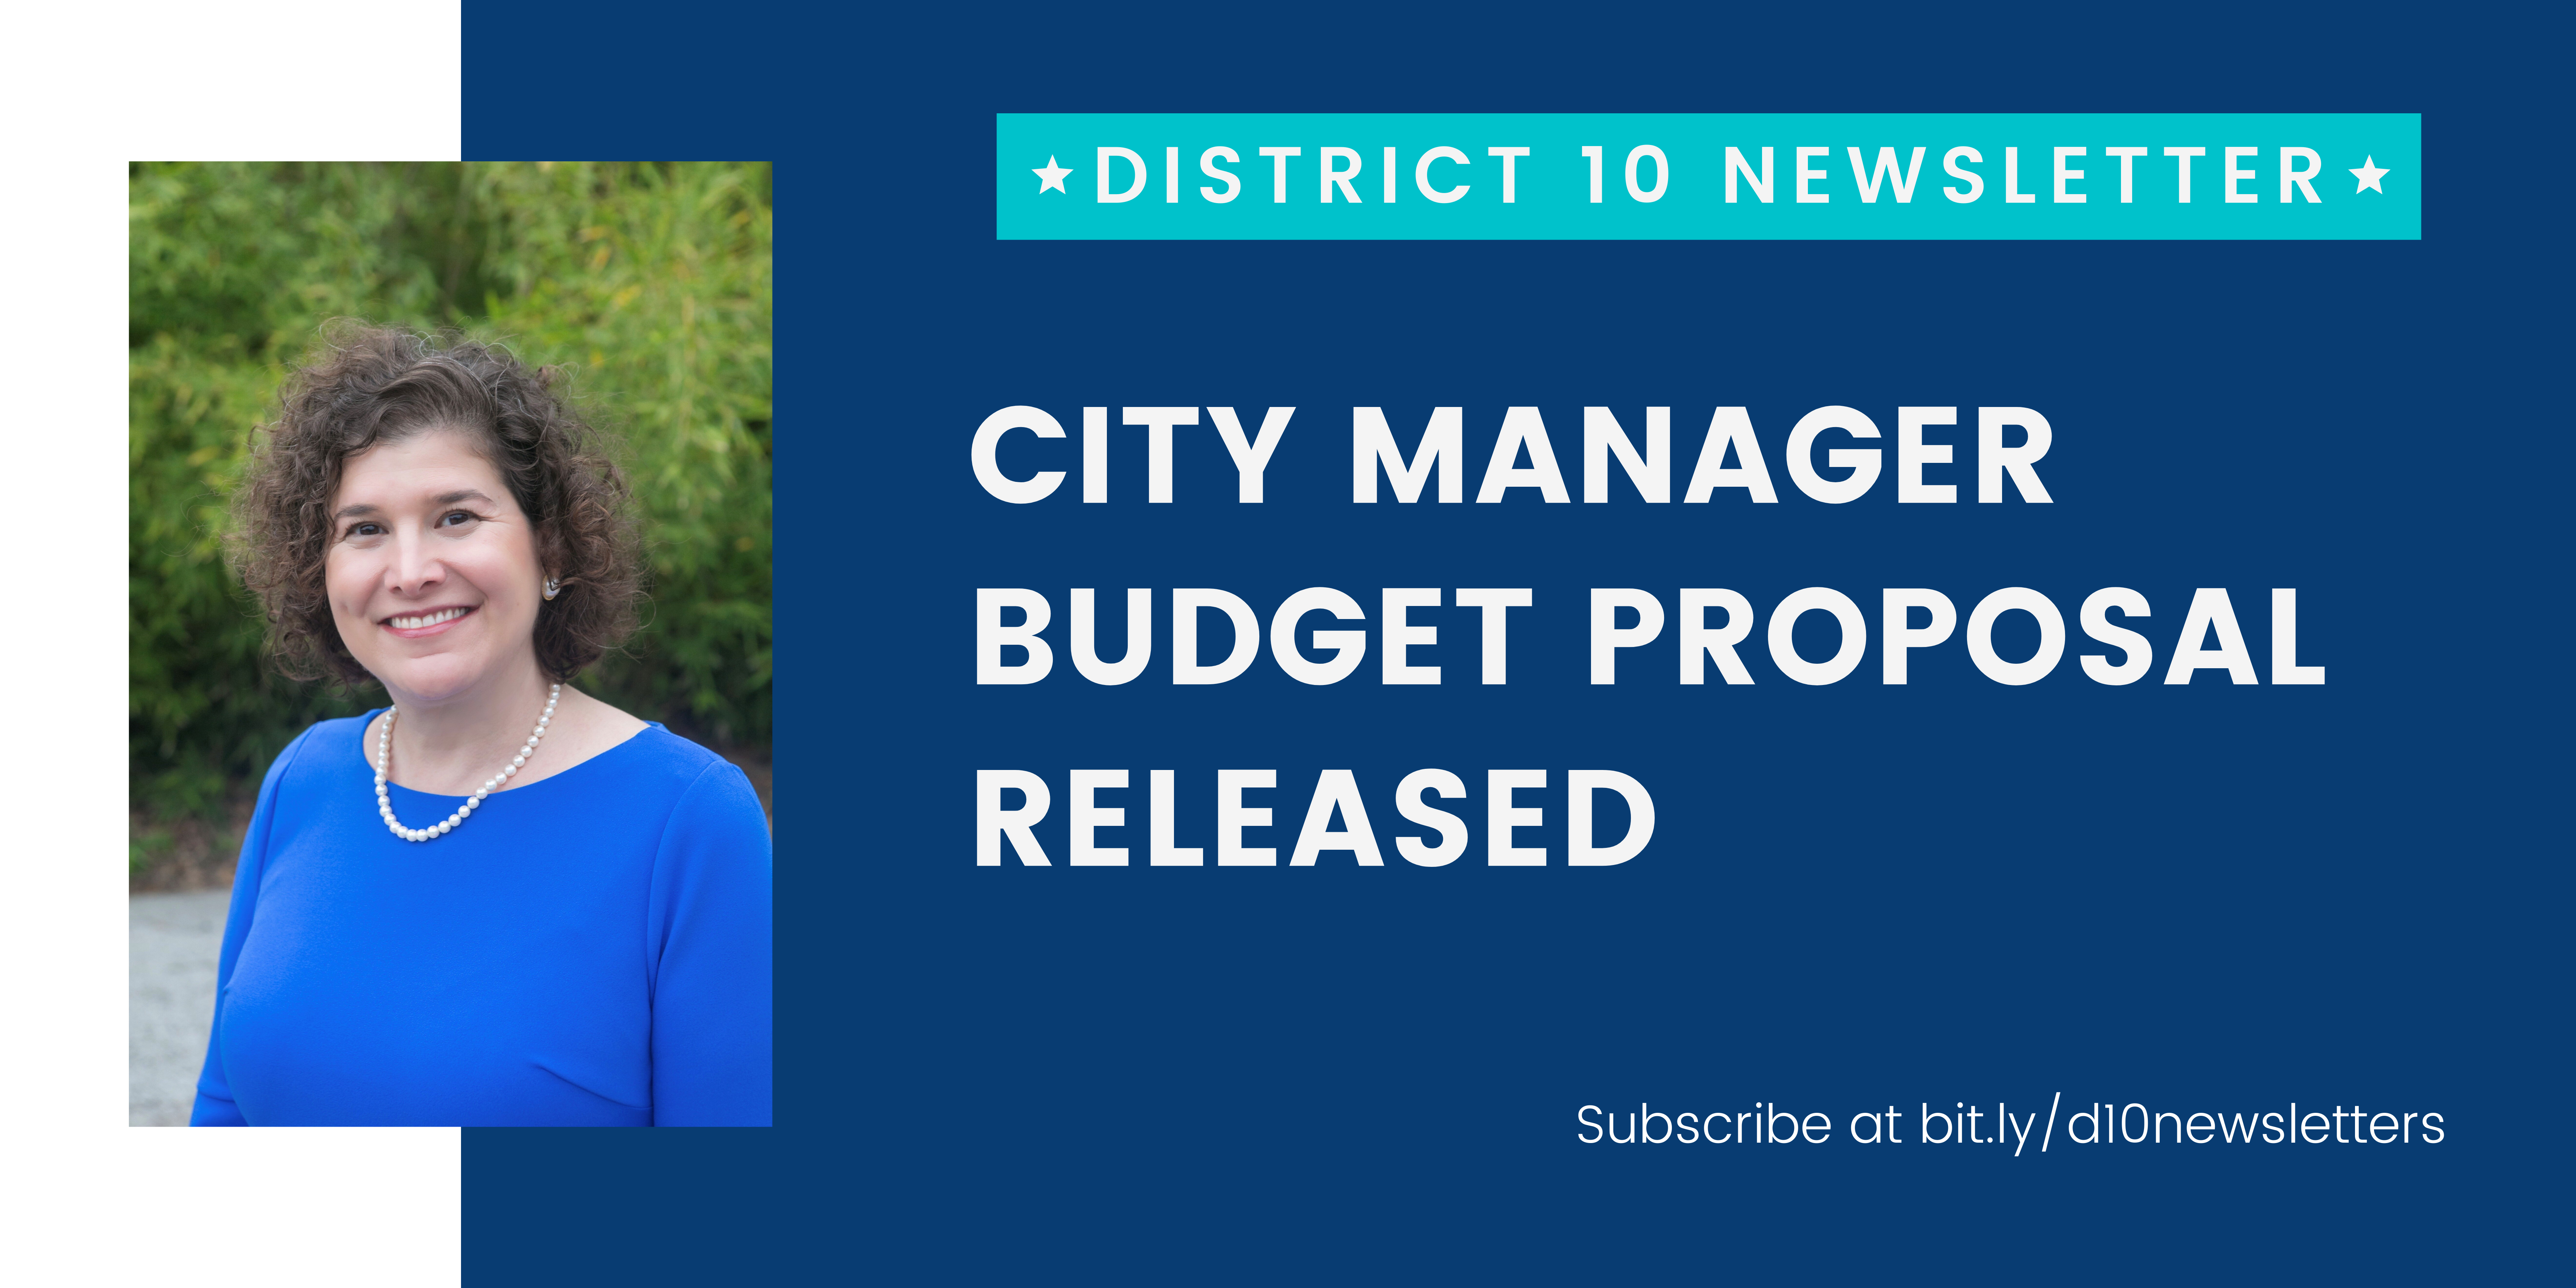 District 10 Newsletter; City Manager Budget Proposal Released. Subscribe at bit.ly/d10newsletters